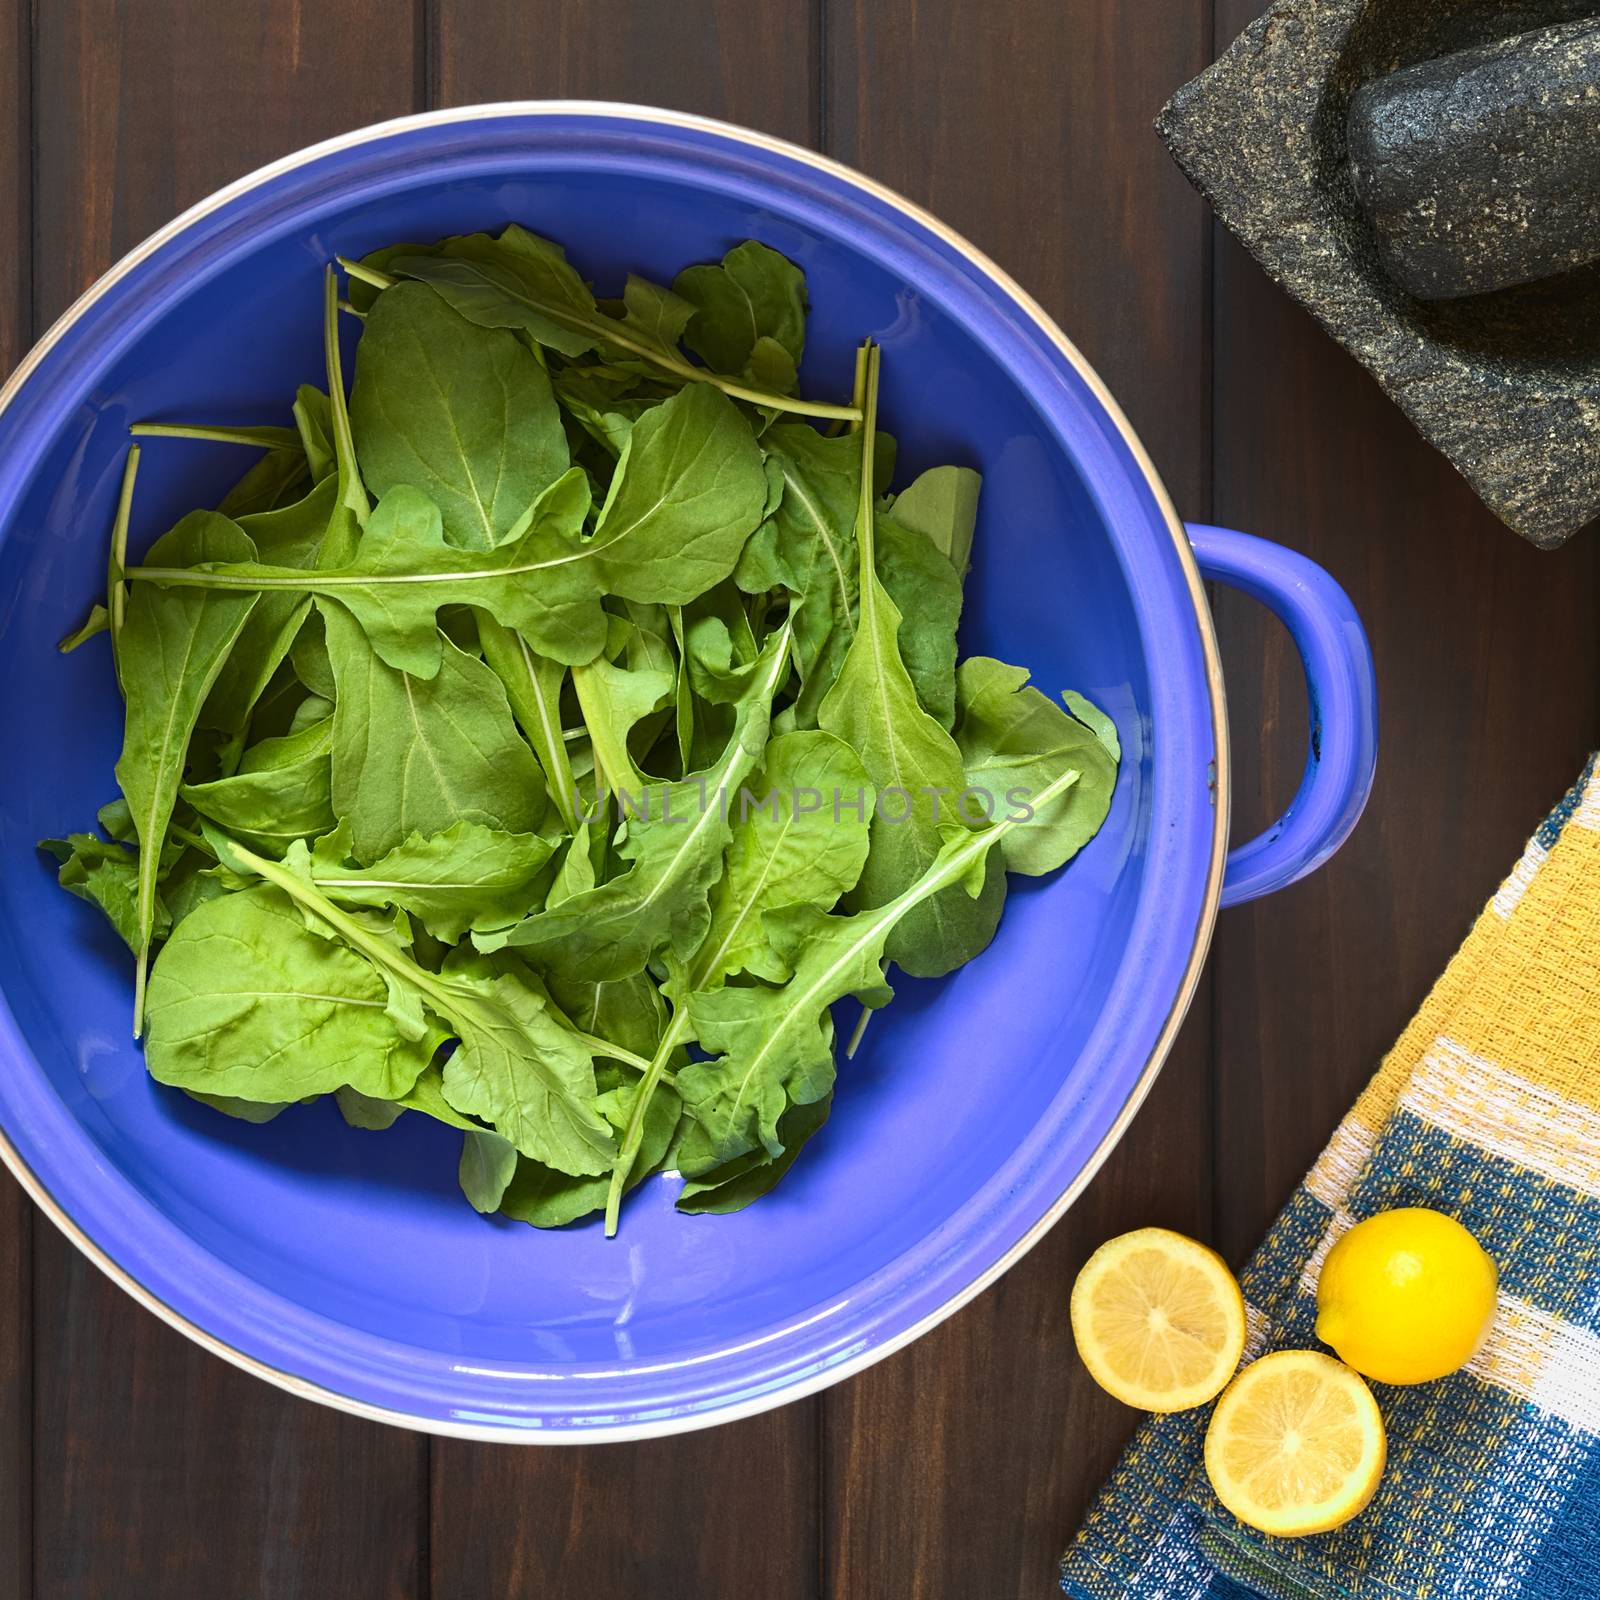 Overhead shot of rucola (lat. Eruca sativa) leaves in blue metal strainer with lemon, mortar and pestle, photographed on dark wood with natural light